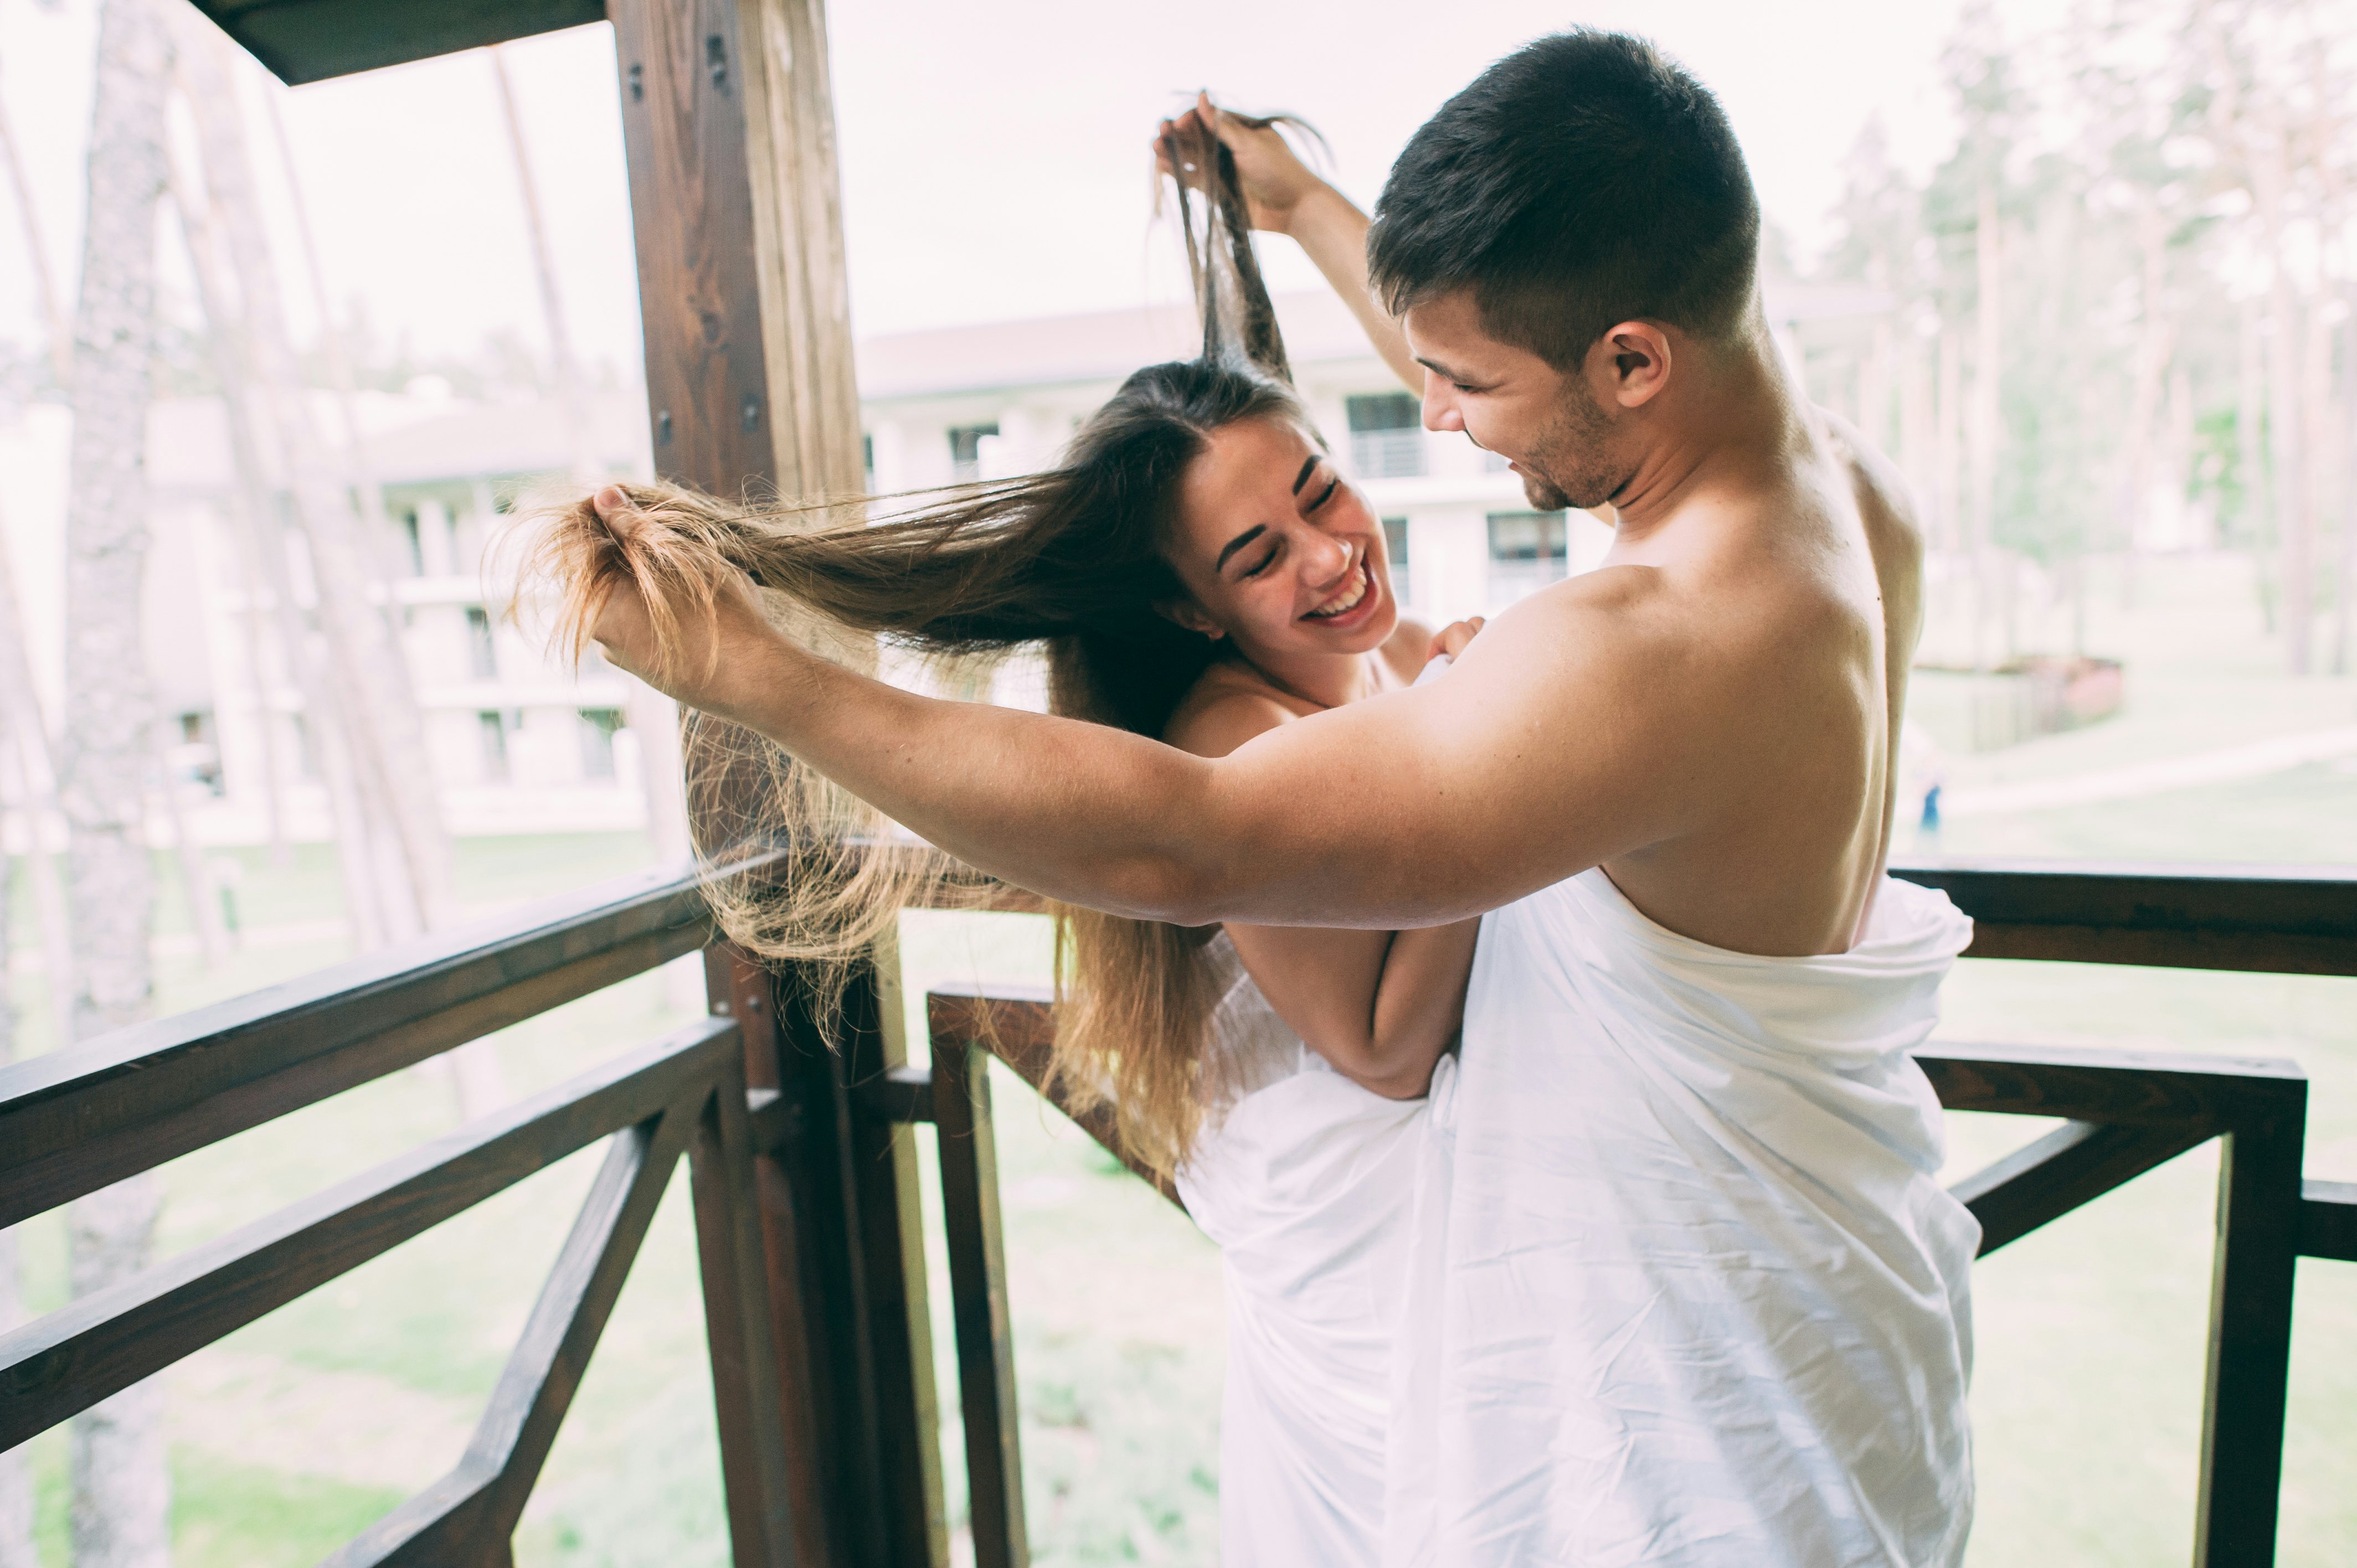 8 Sex Moves To Try On Your Balcony That'll Give You Big Deck Energy